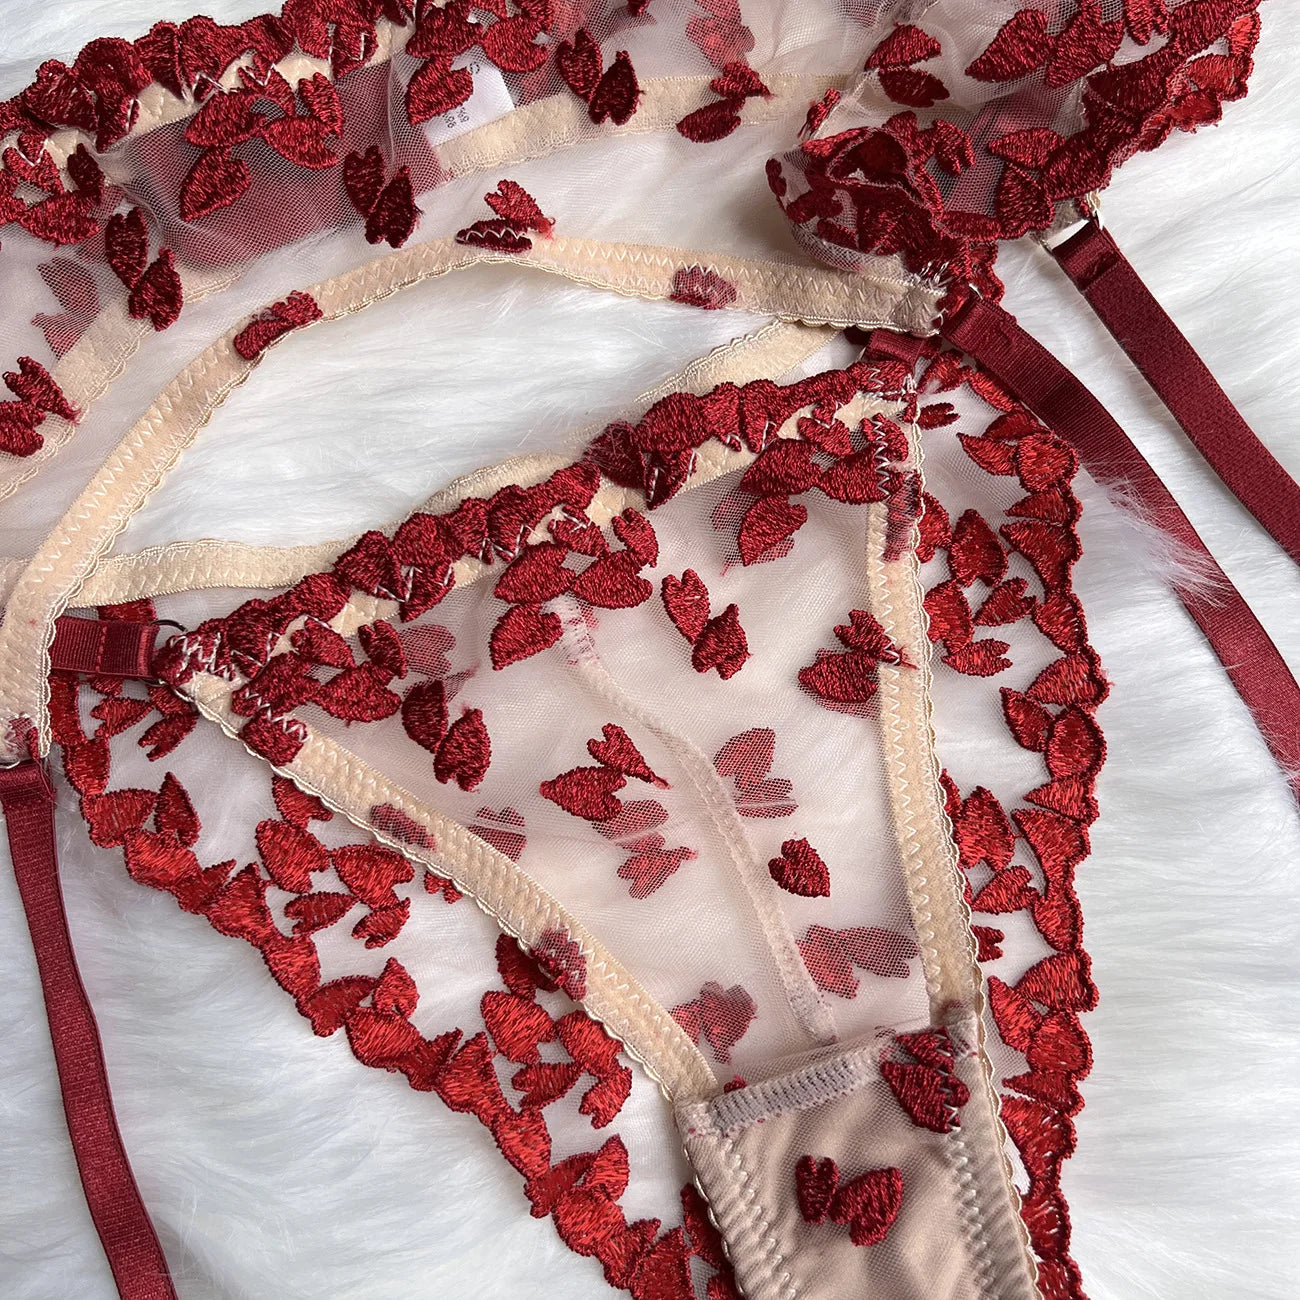 Heart Lingerie Sheer Lace Embroidery Sensual Bra + Panty Underwear Set 4-Piece Ruffle Delicate Sexy Outfits - Sellinashop